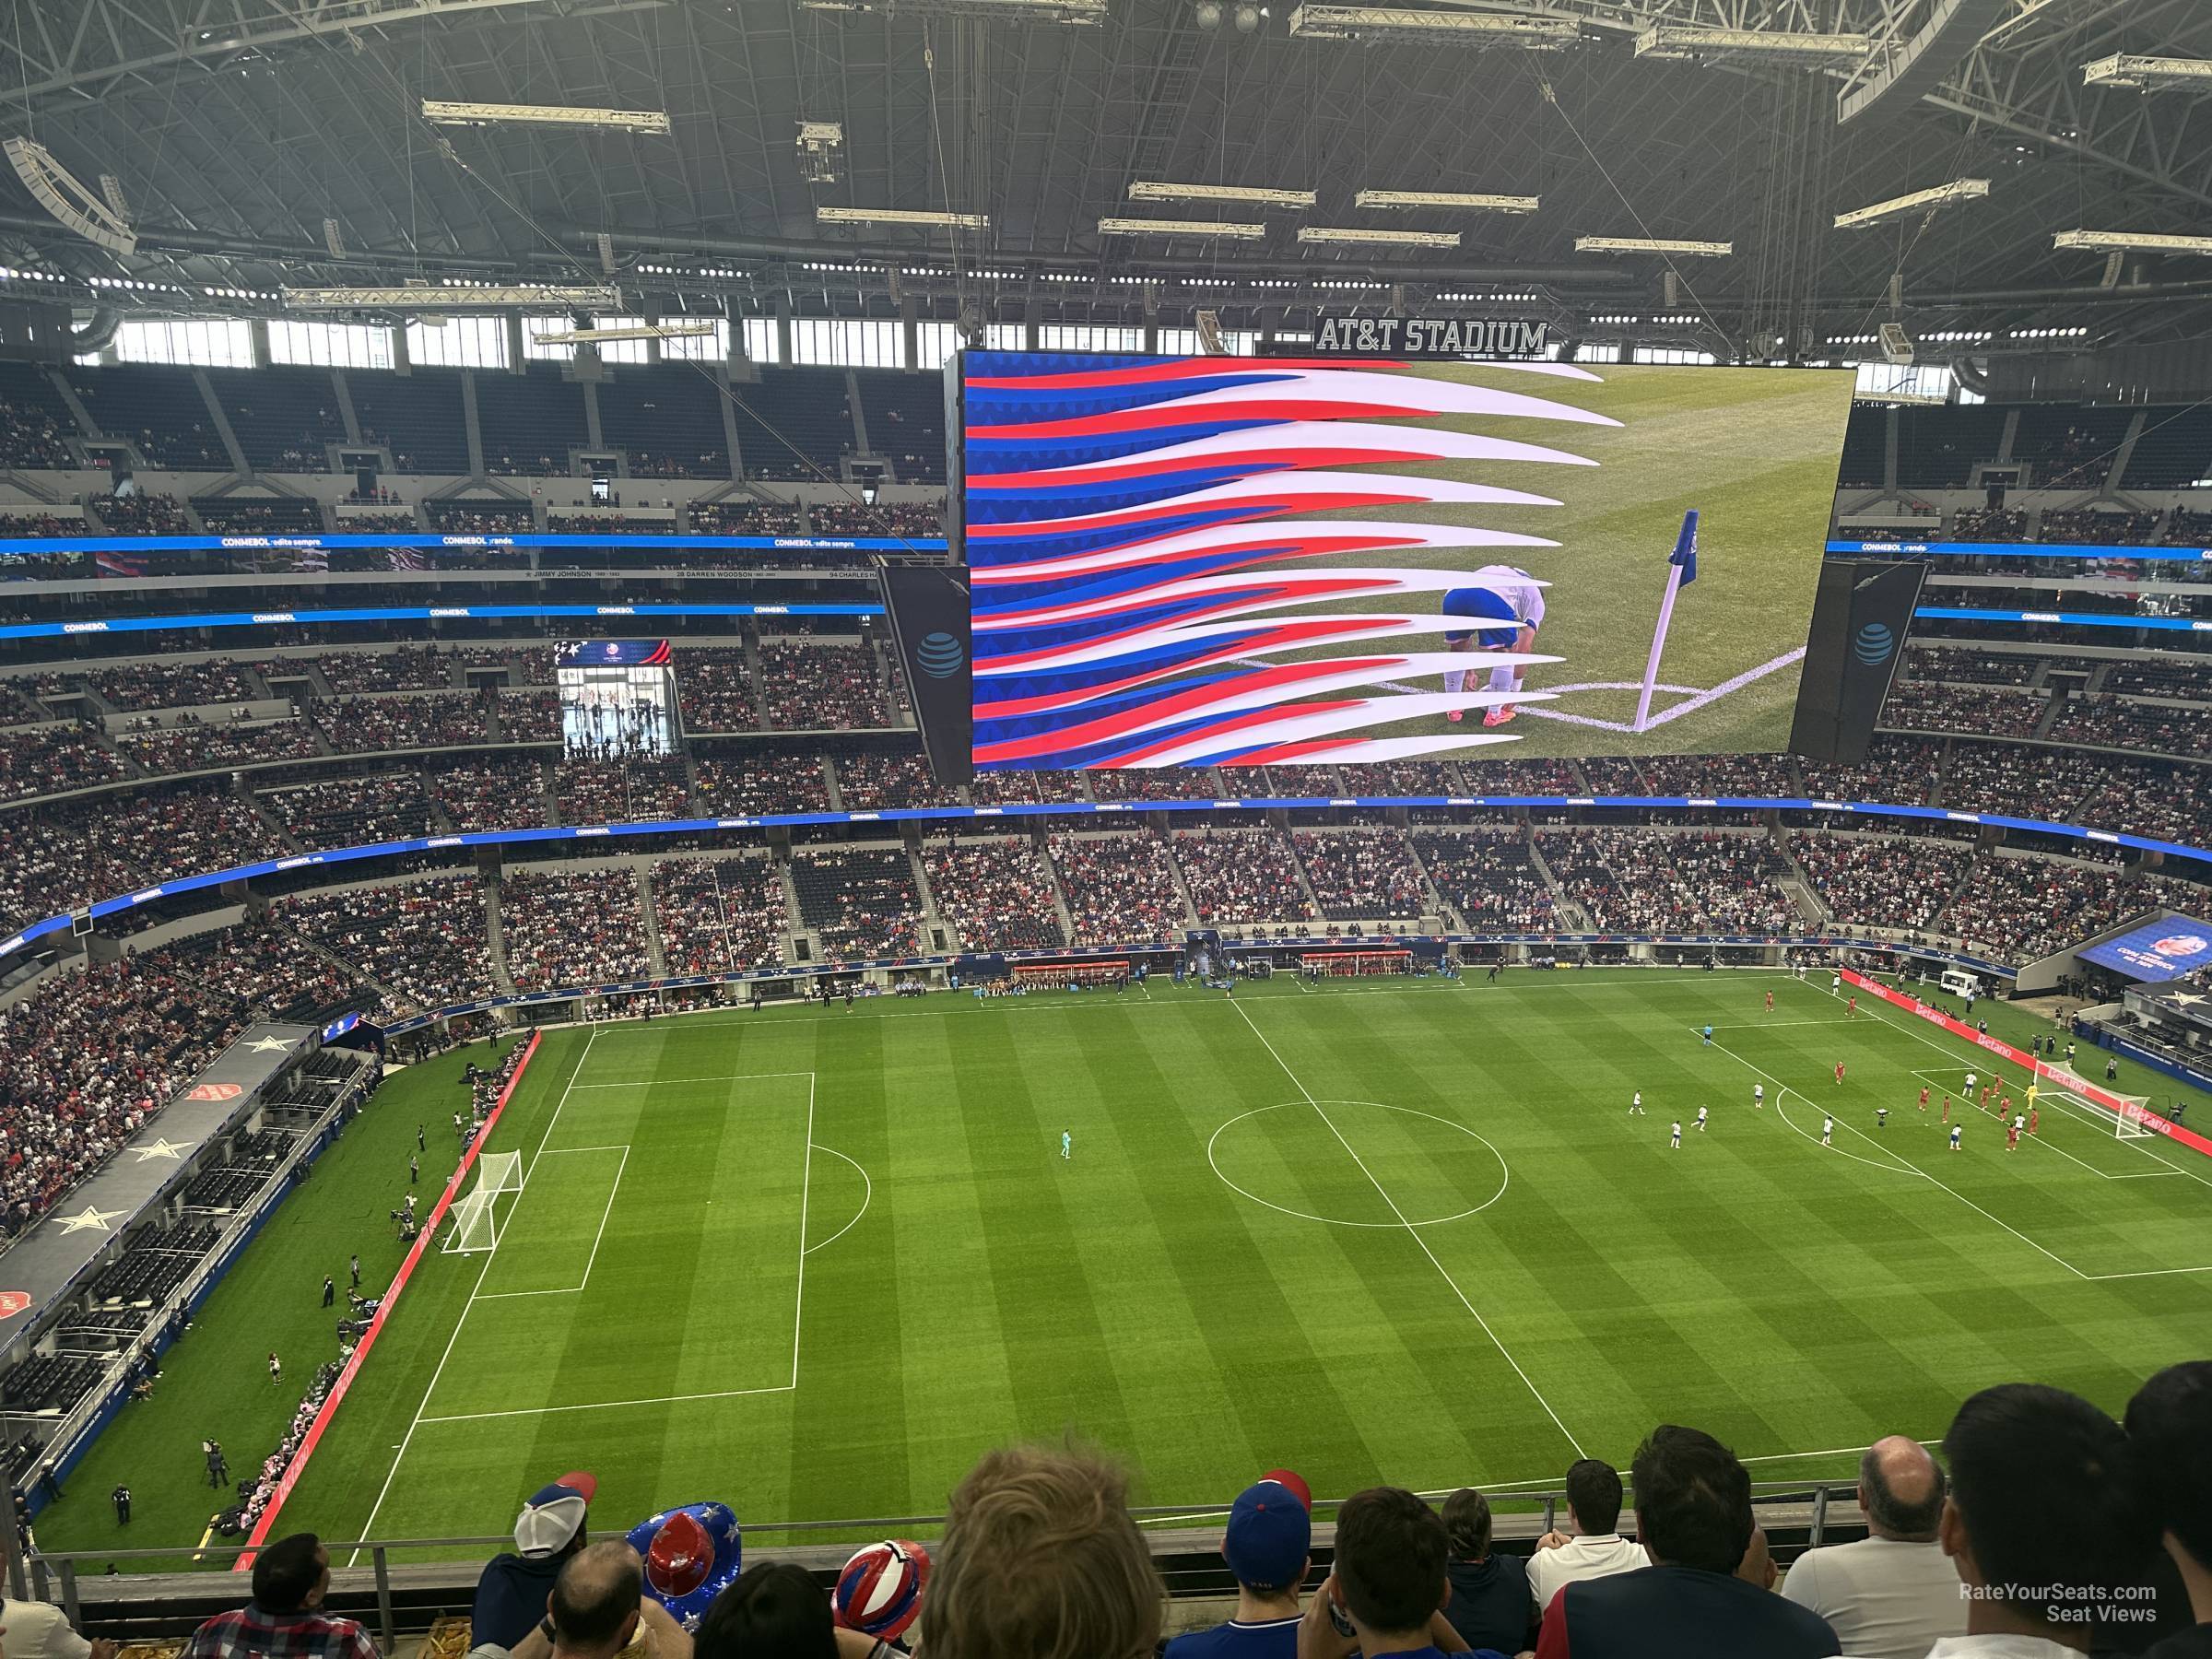 section 414, row 6 seat view  for soccer - at&t stadium (cowboys stadium)